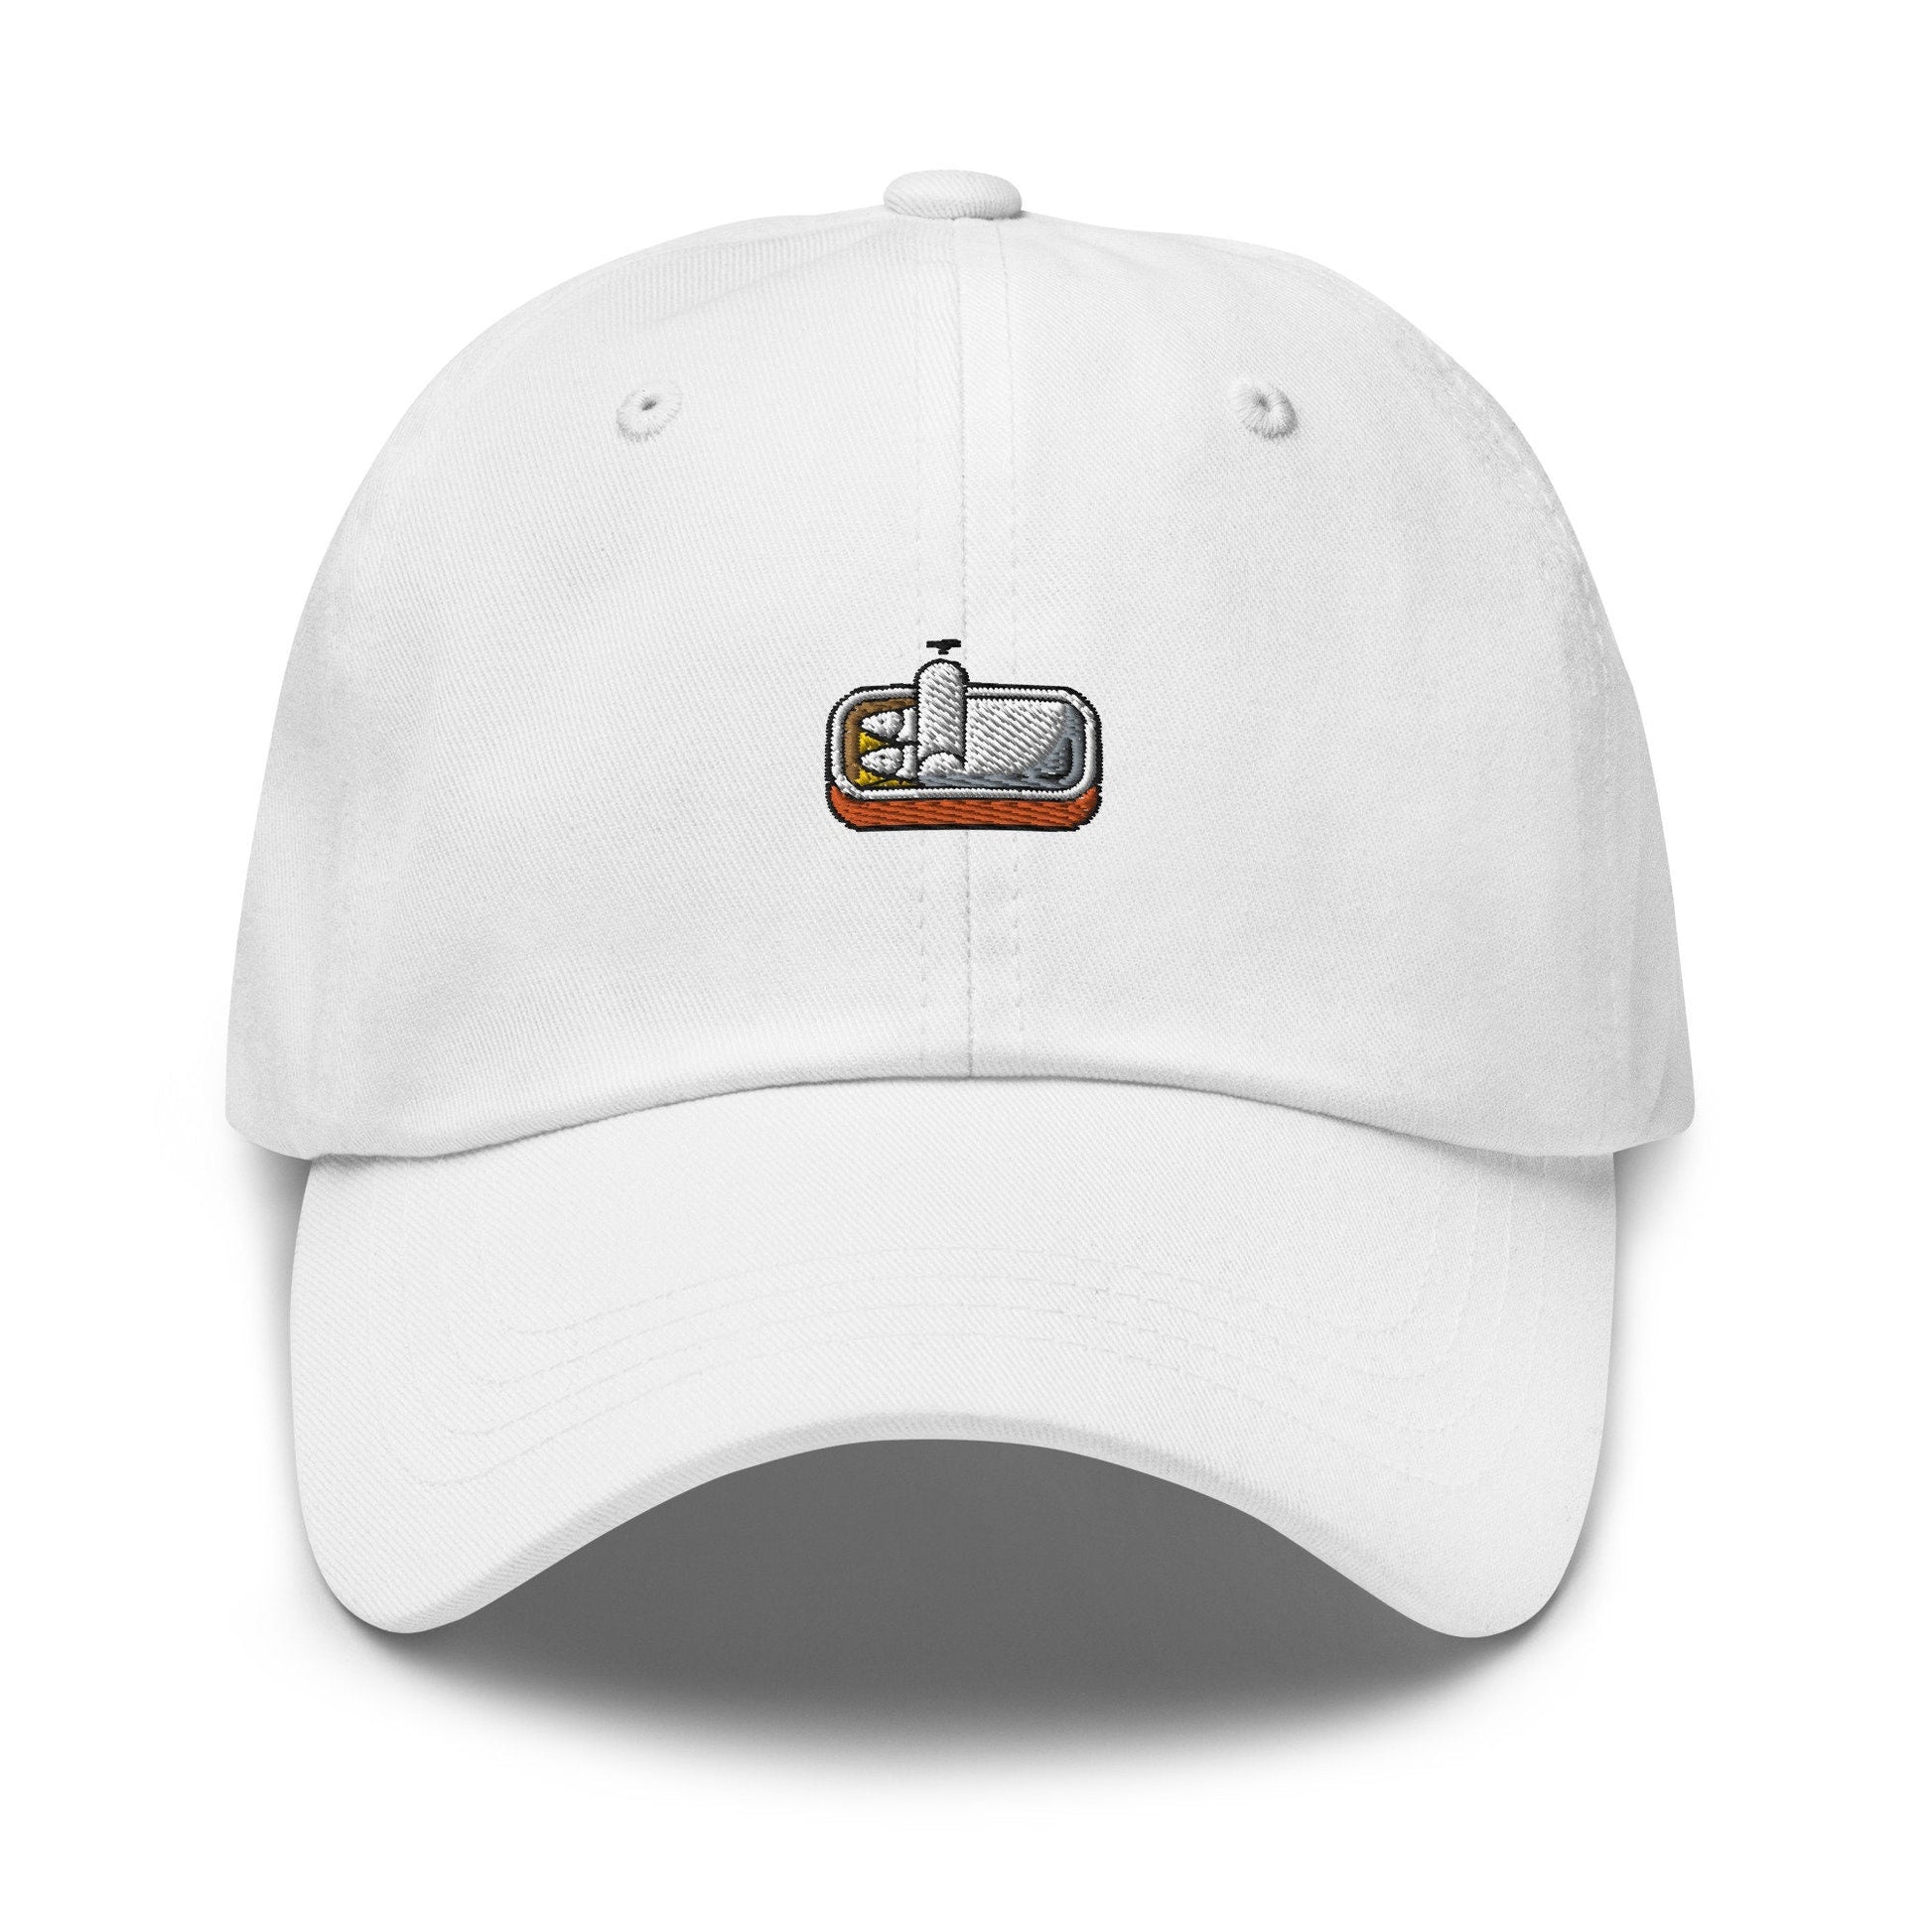 Sardine Dad Hat - Canned Fish Moment - Anchovy Fans - Seafood Lovers - Cotton Embroidered Cap - Multiple Colors - Evilwater Originals